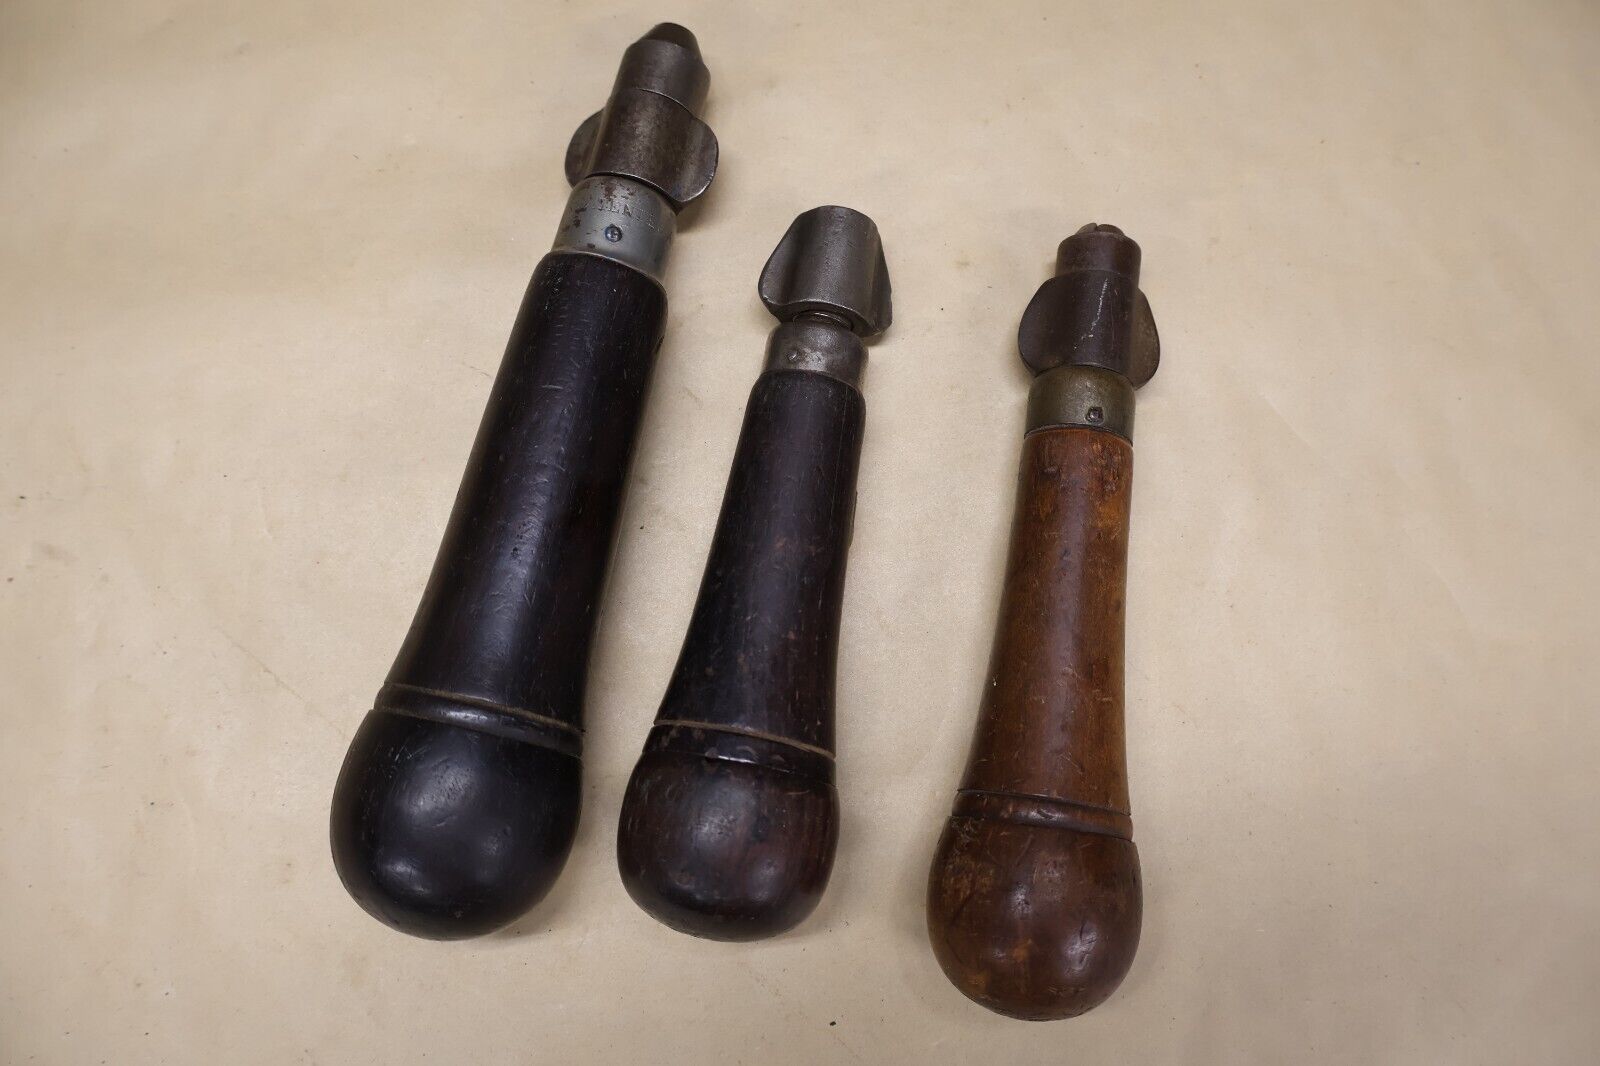 Lot of 3 vintage multi tool holders, Pat aug 12 1884, w/ bits and tools